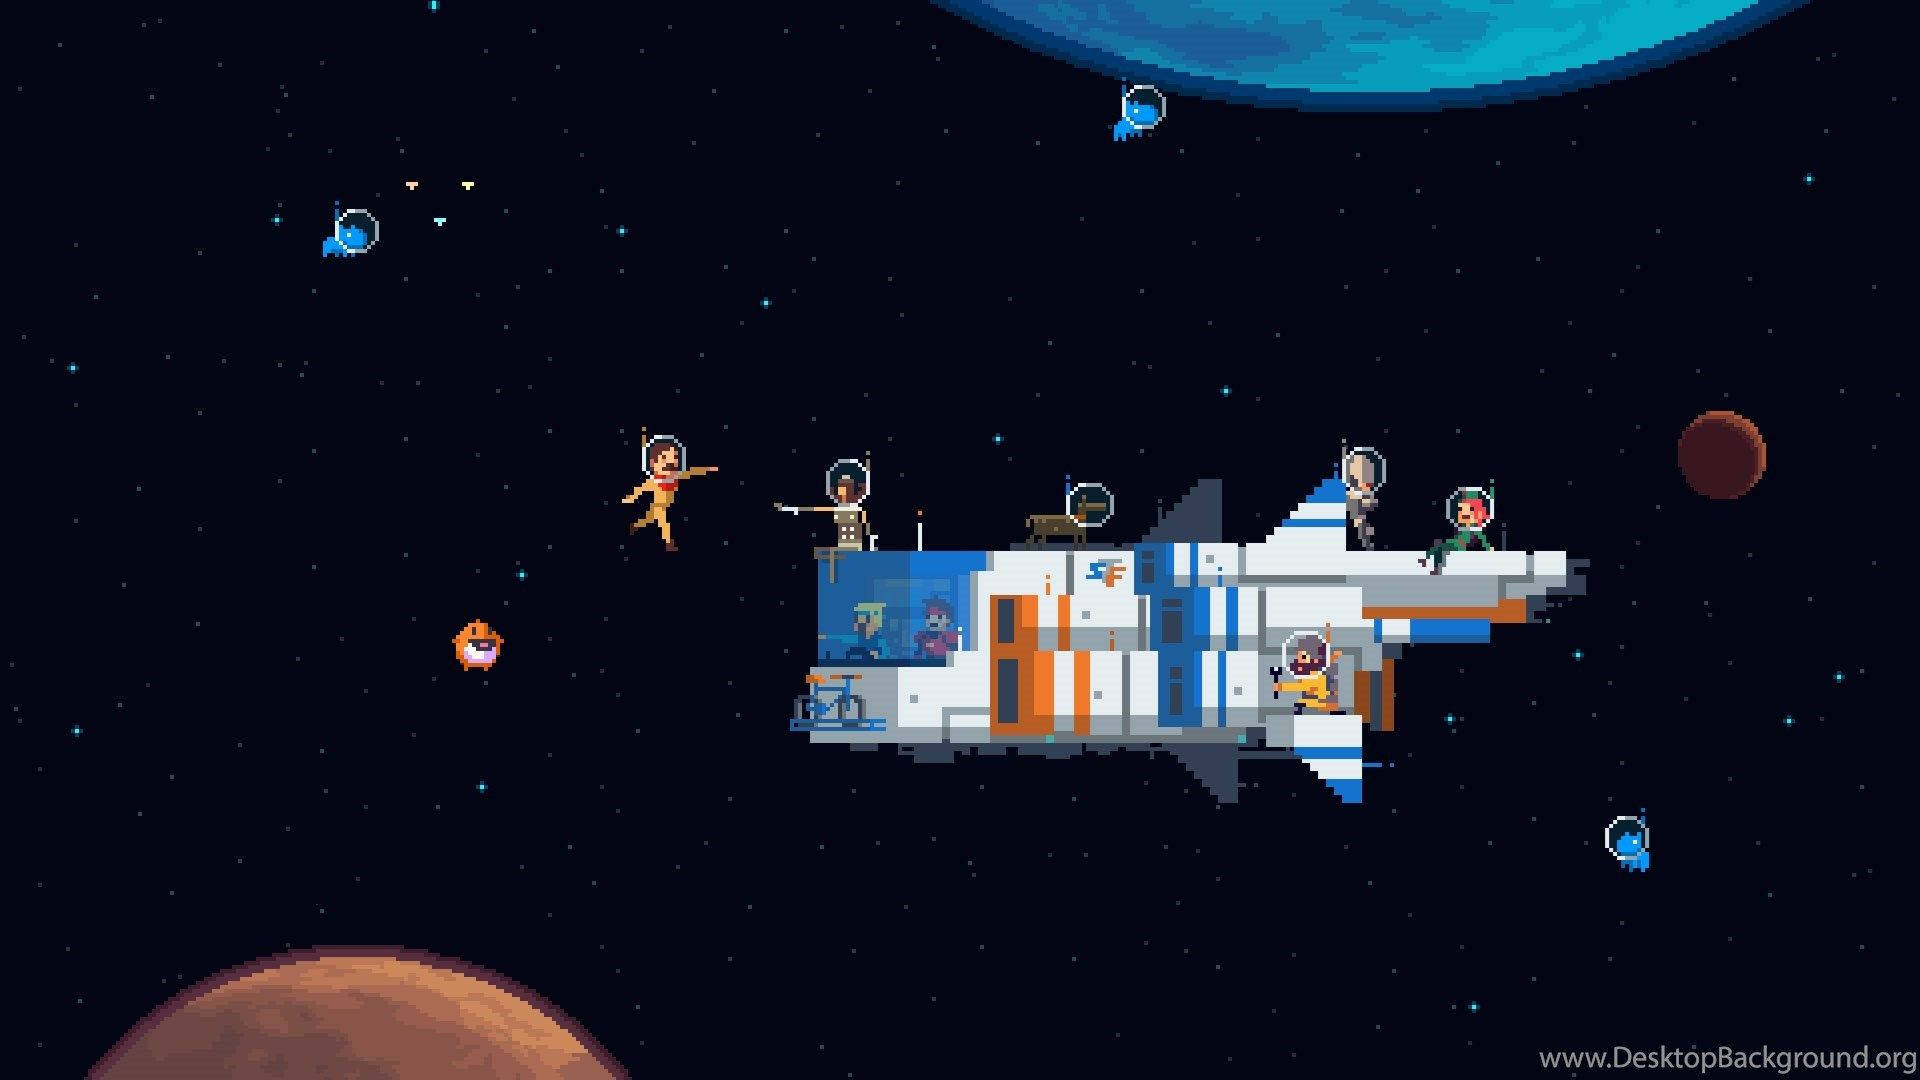 Pixel Art Spaceship In Outer Space